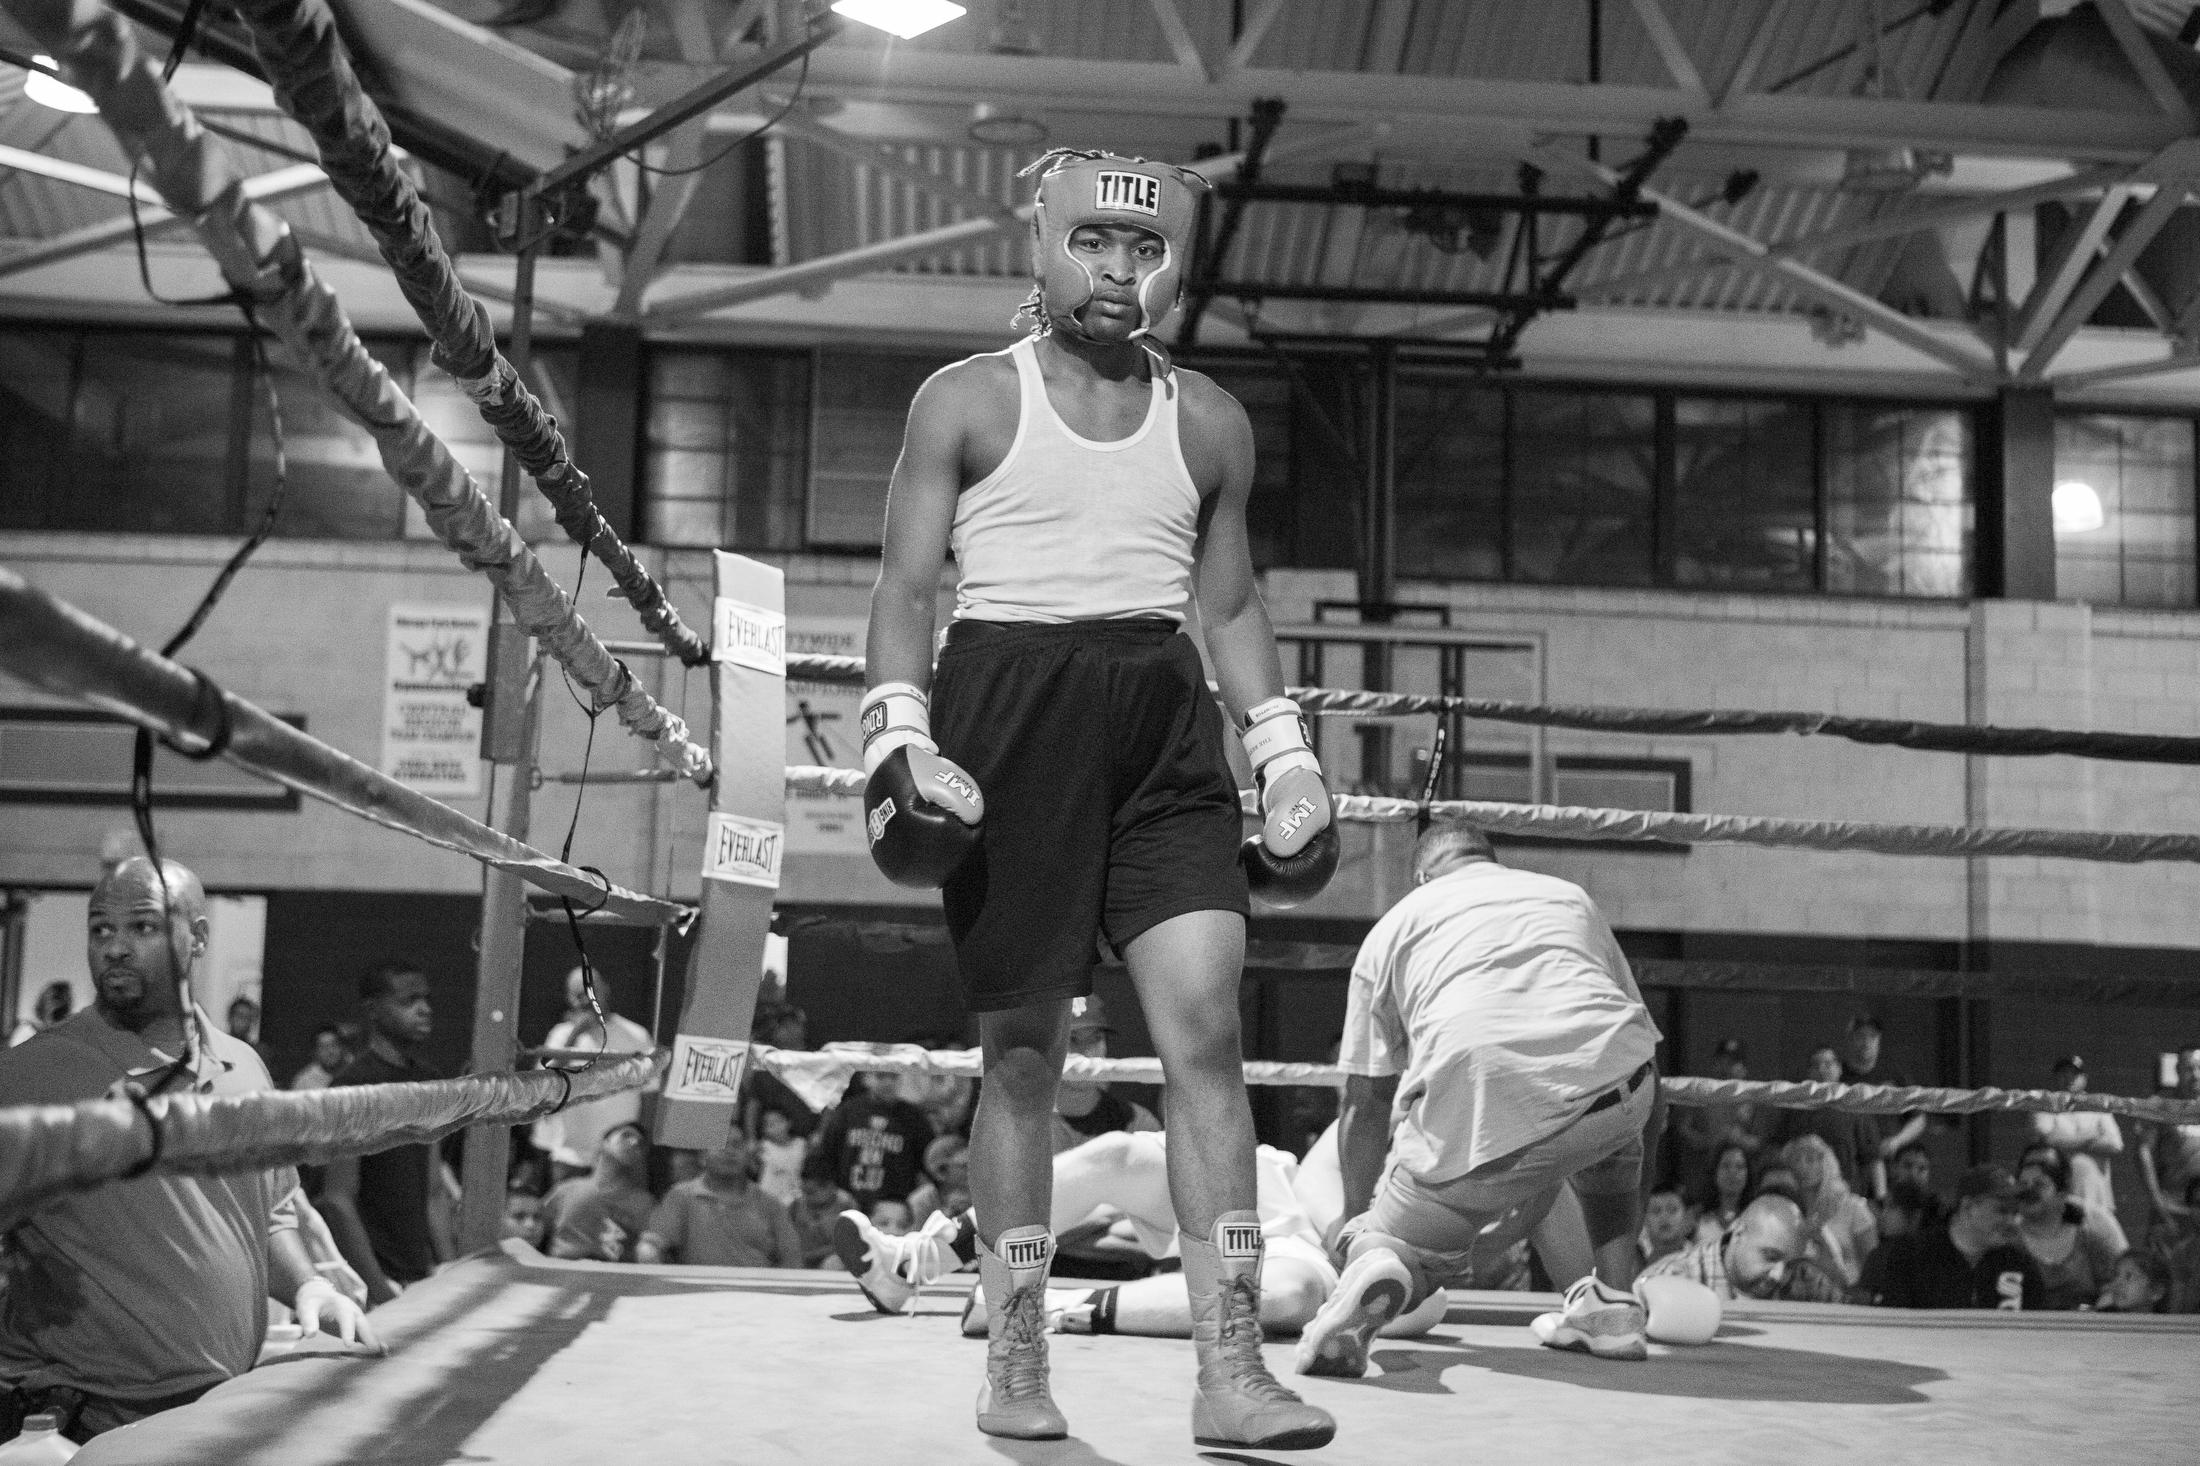 10 years in a boxing gym - Terrence, after knocking out his opponent during the...